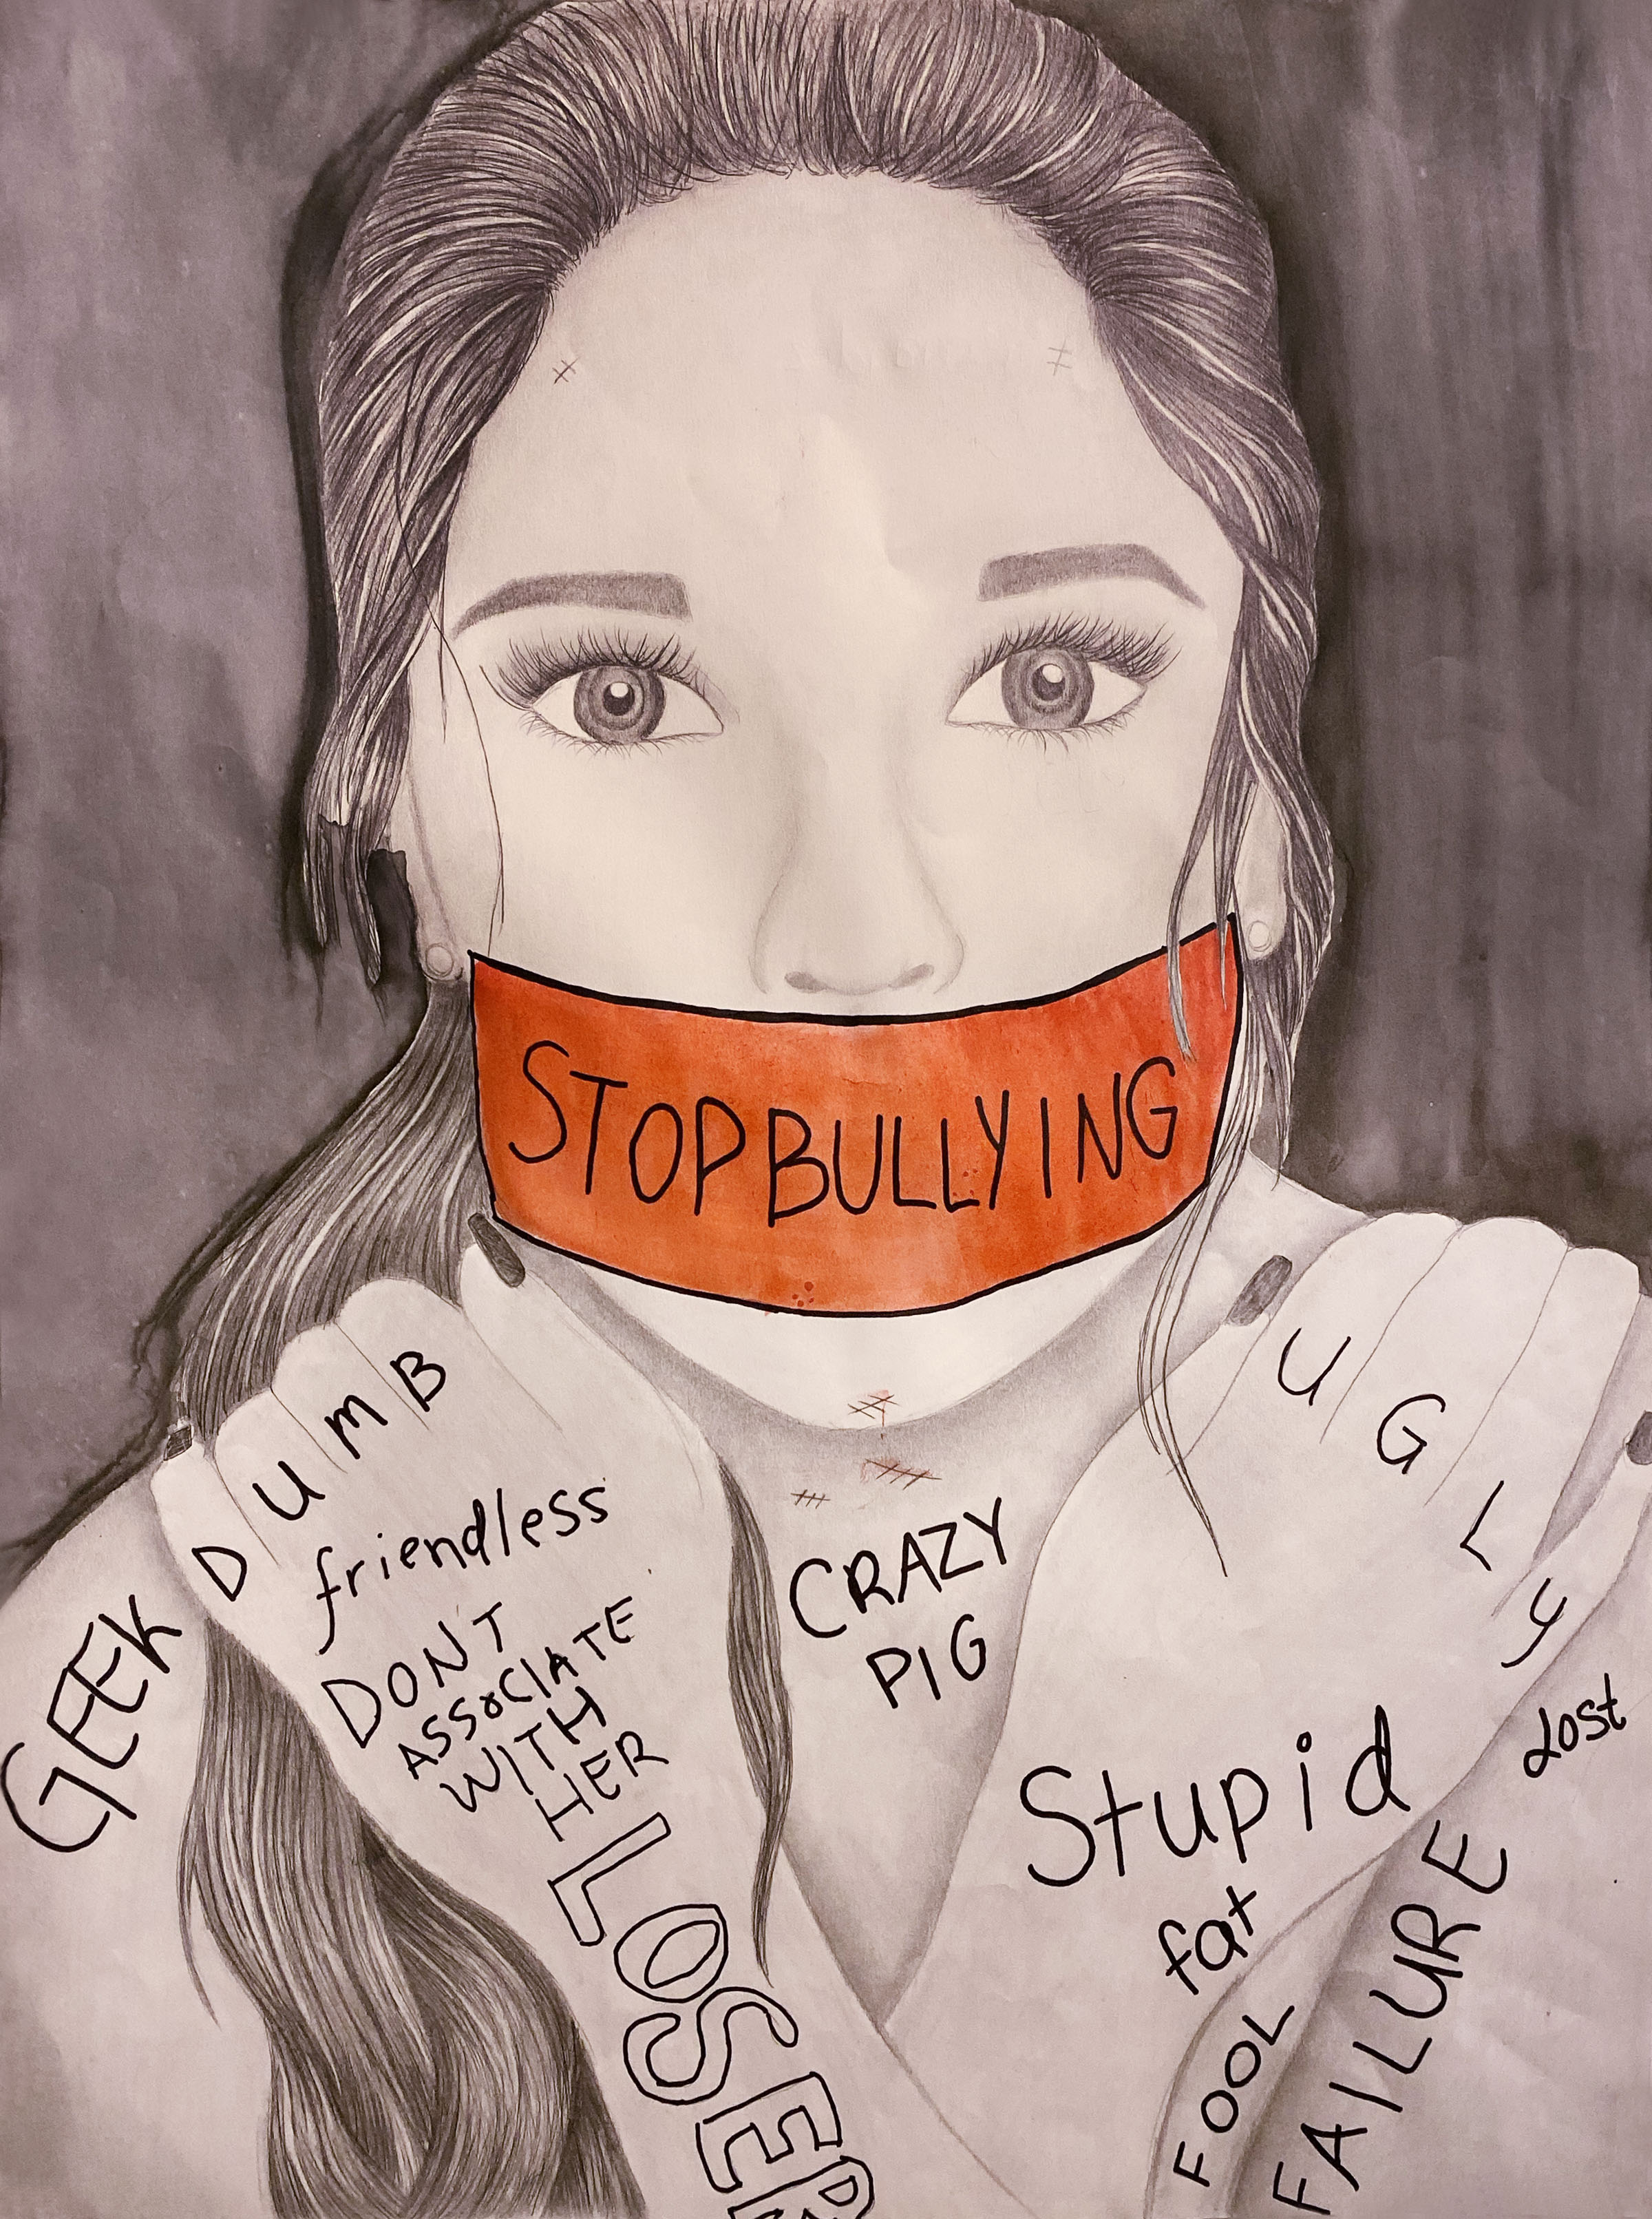 AntiBullying Poster Contest Winners Announced Natomas Unified School